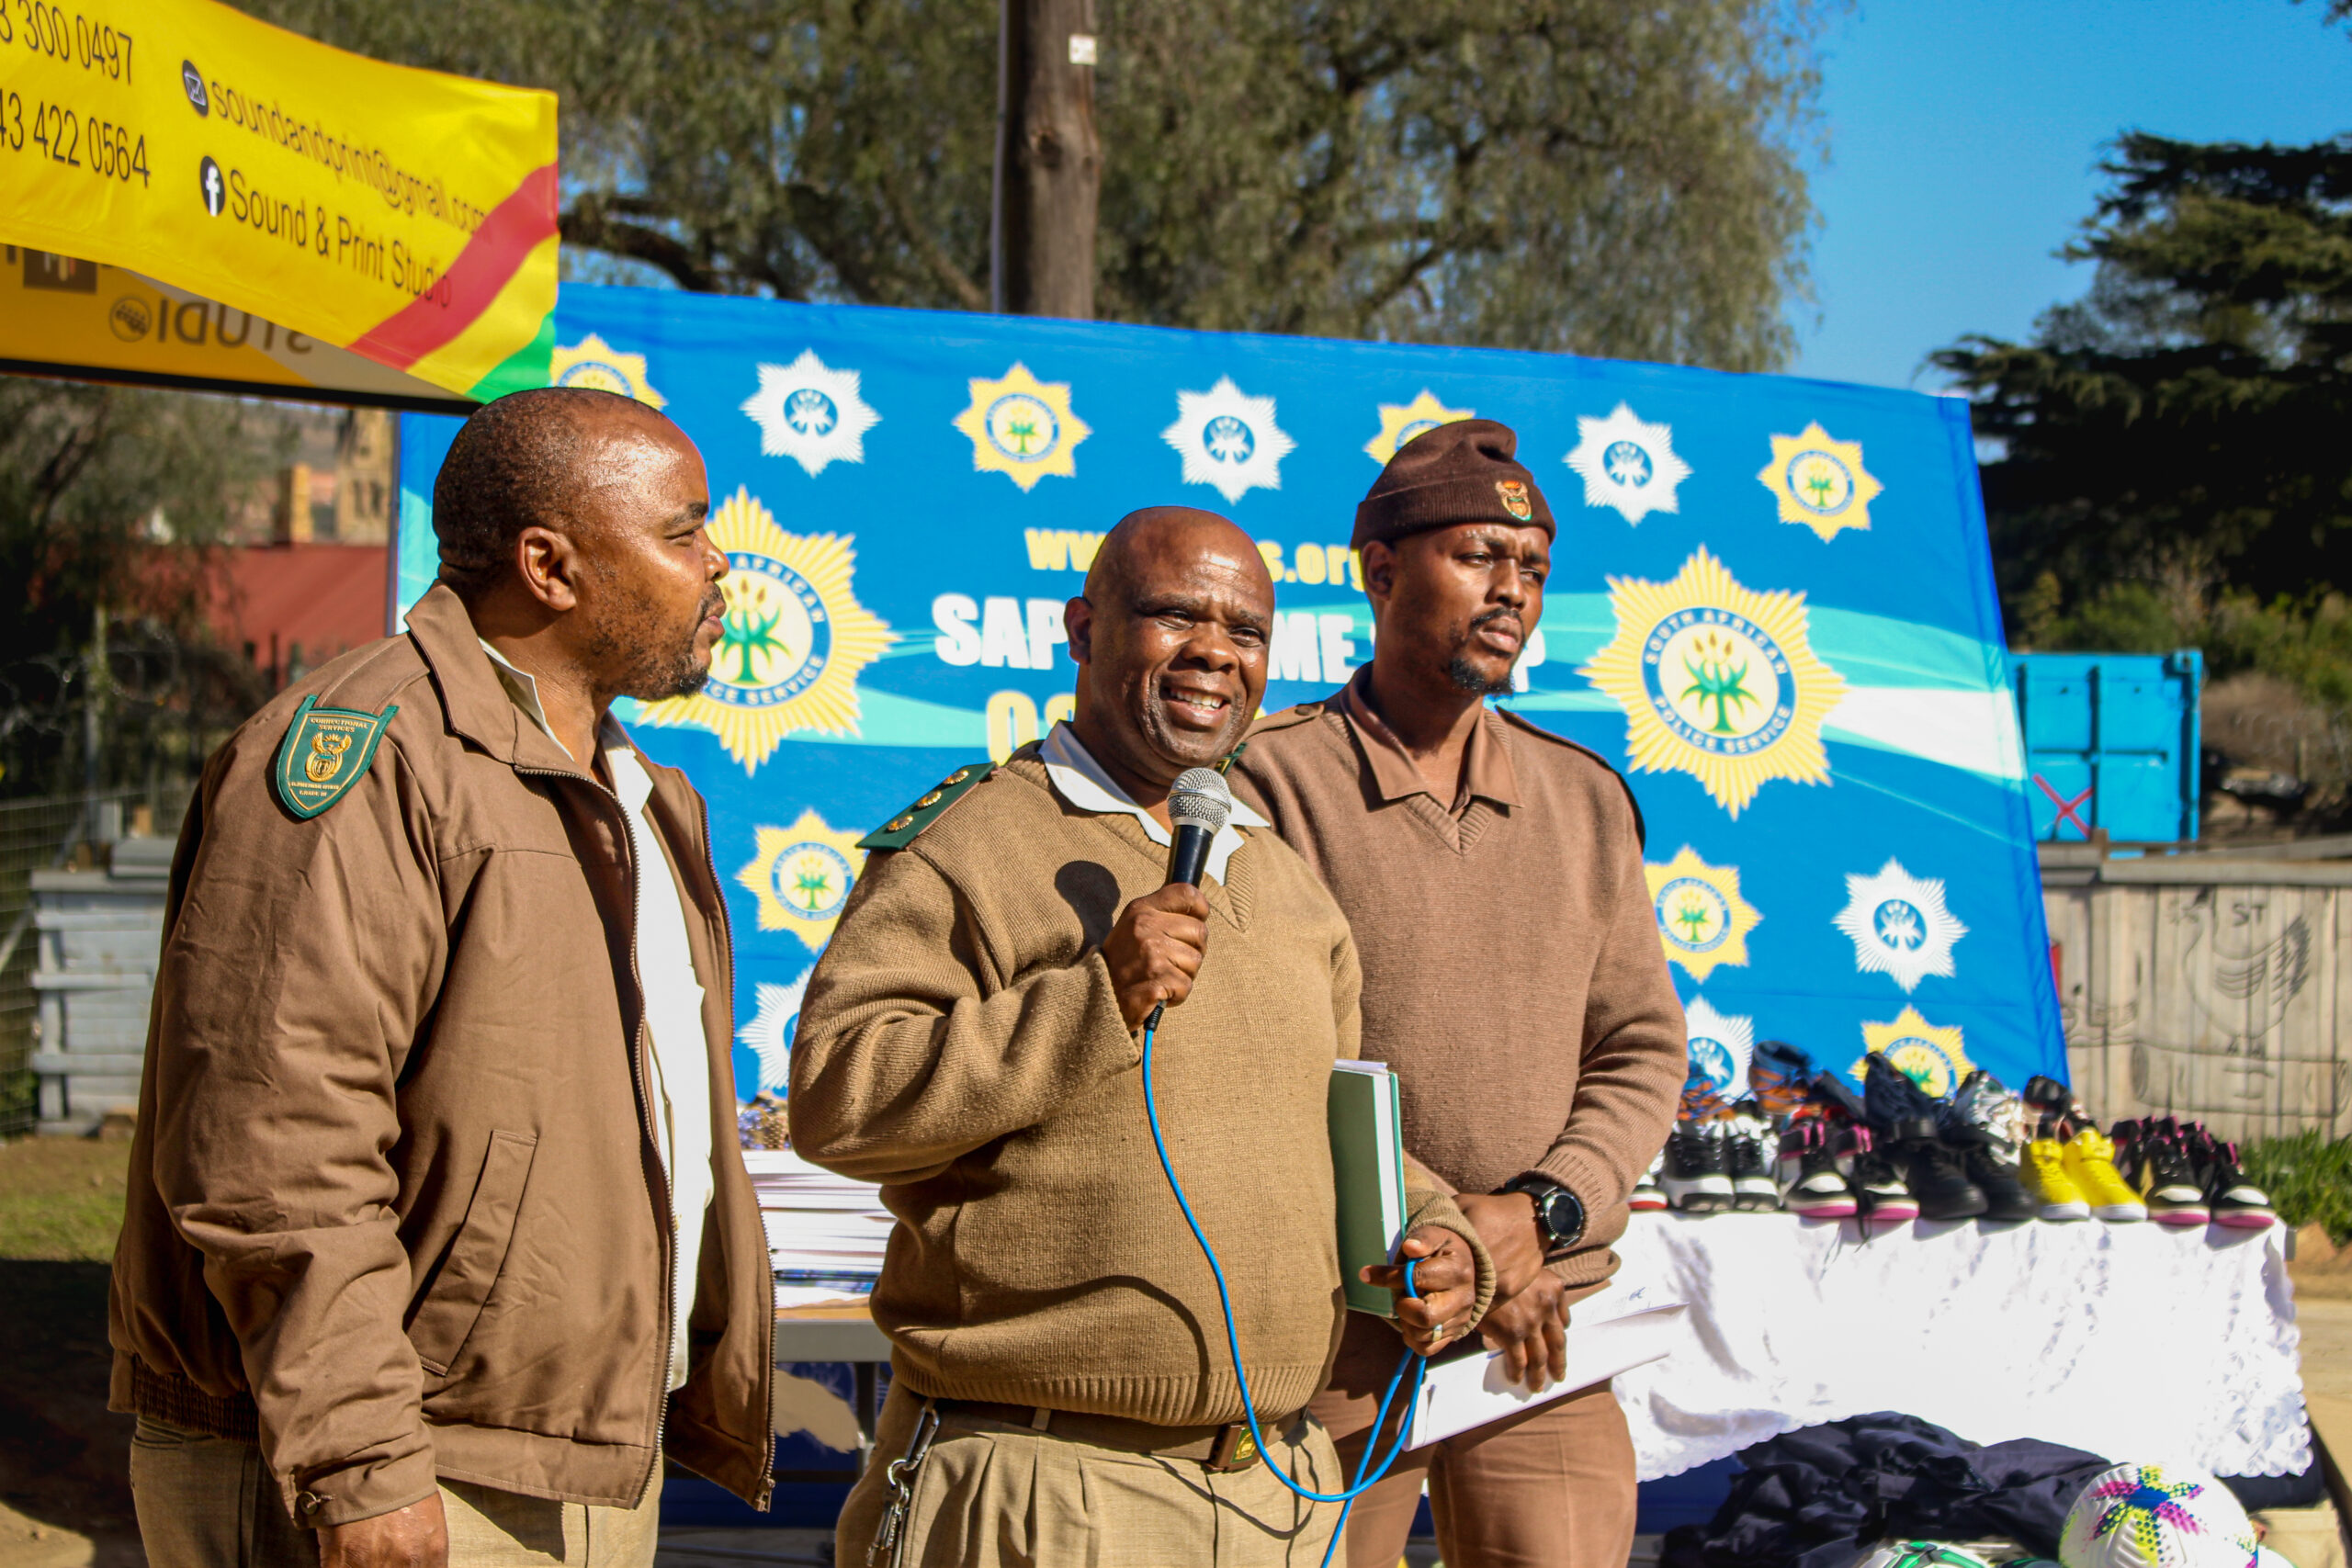 From left: Correctional Services officials Mr Mathumbu, Mr Hasha and Mr Peter spoke about crime at the Eluxolweni Child and Youth Centre Mandela Day event. Photo: Fahdia Msaka